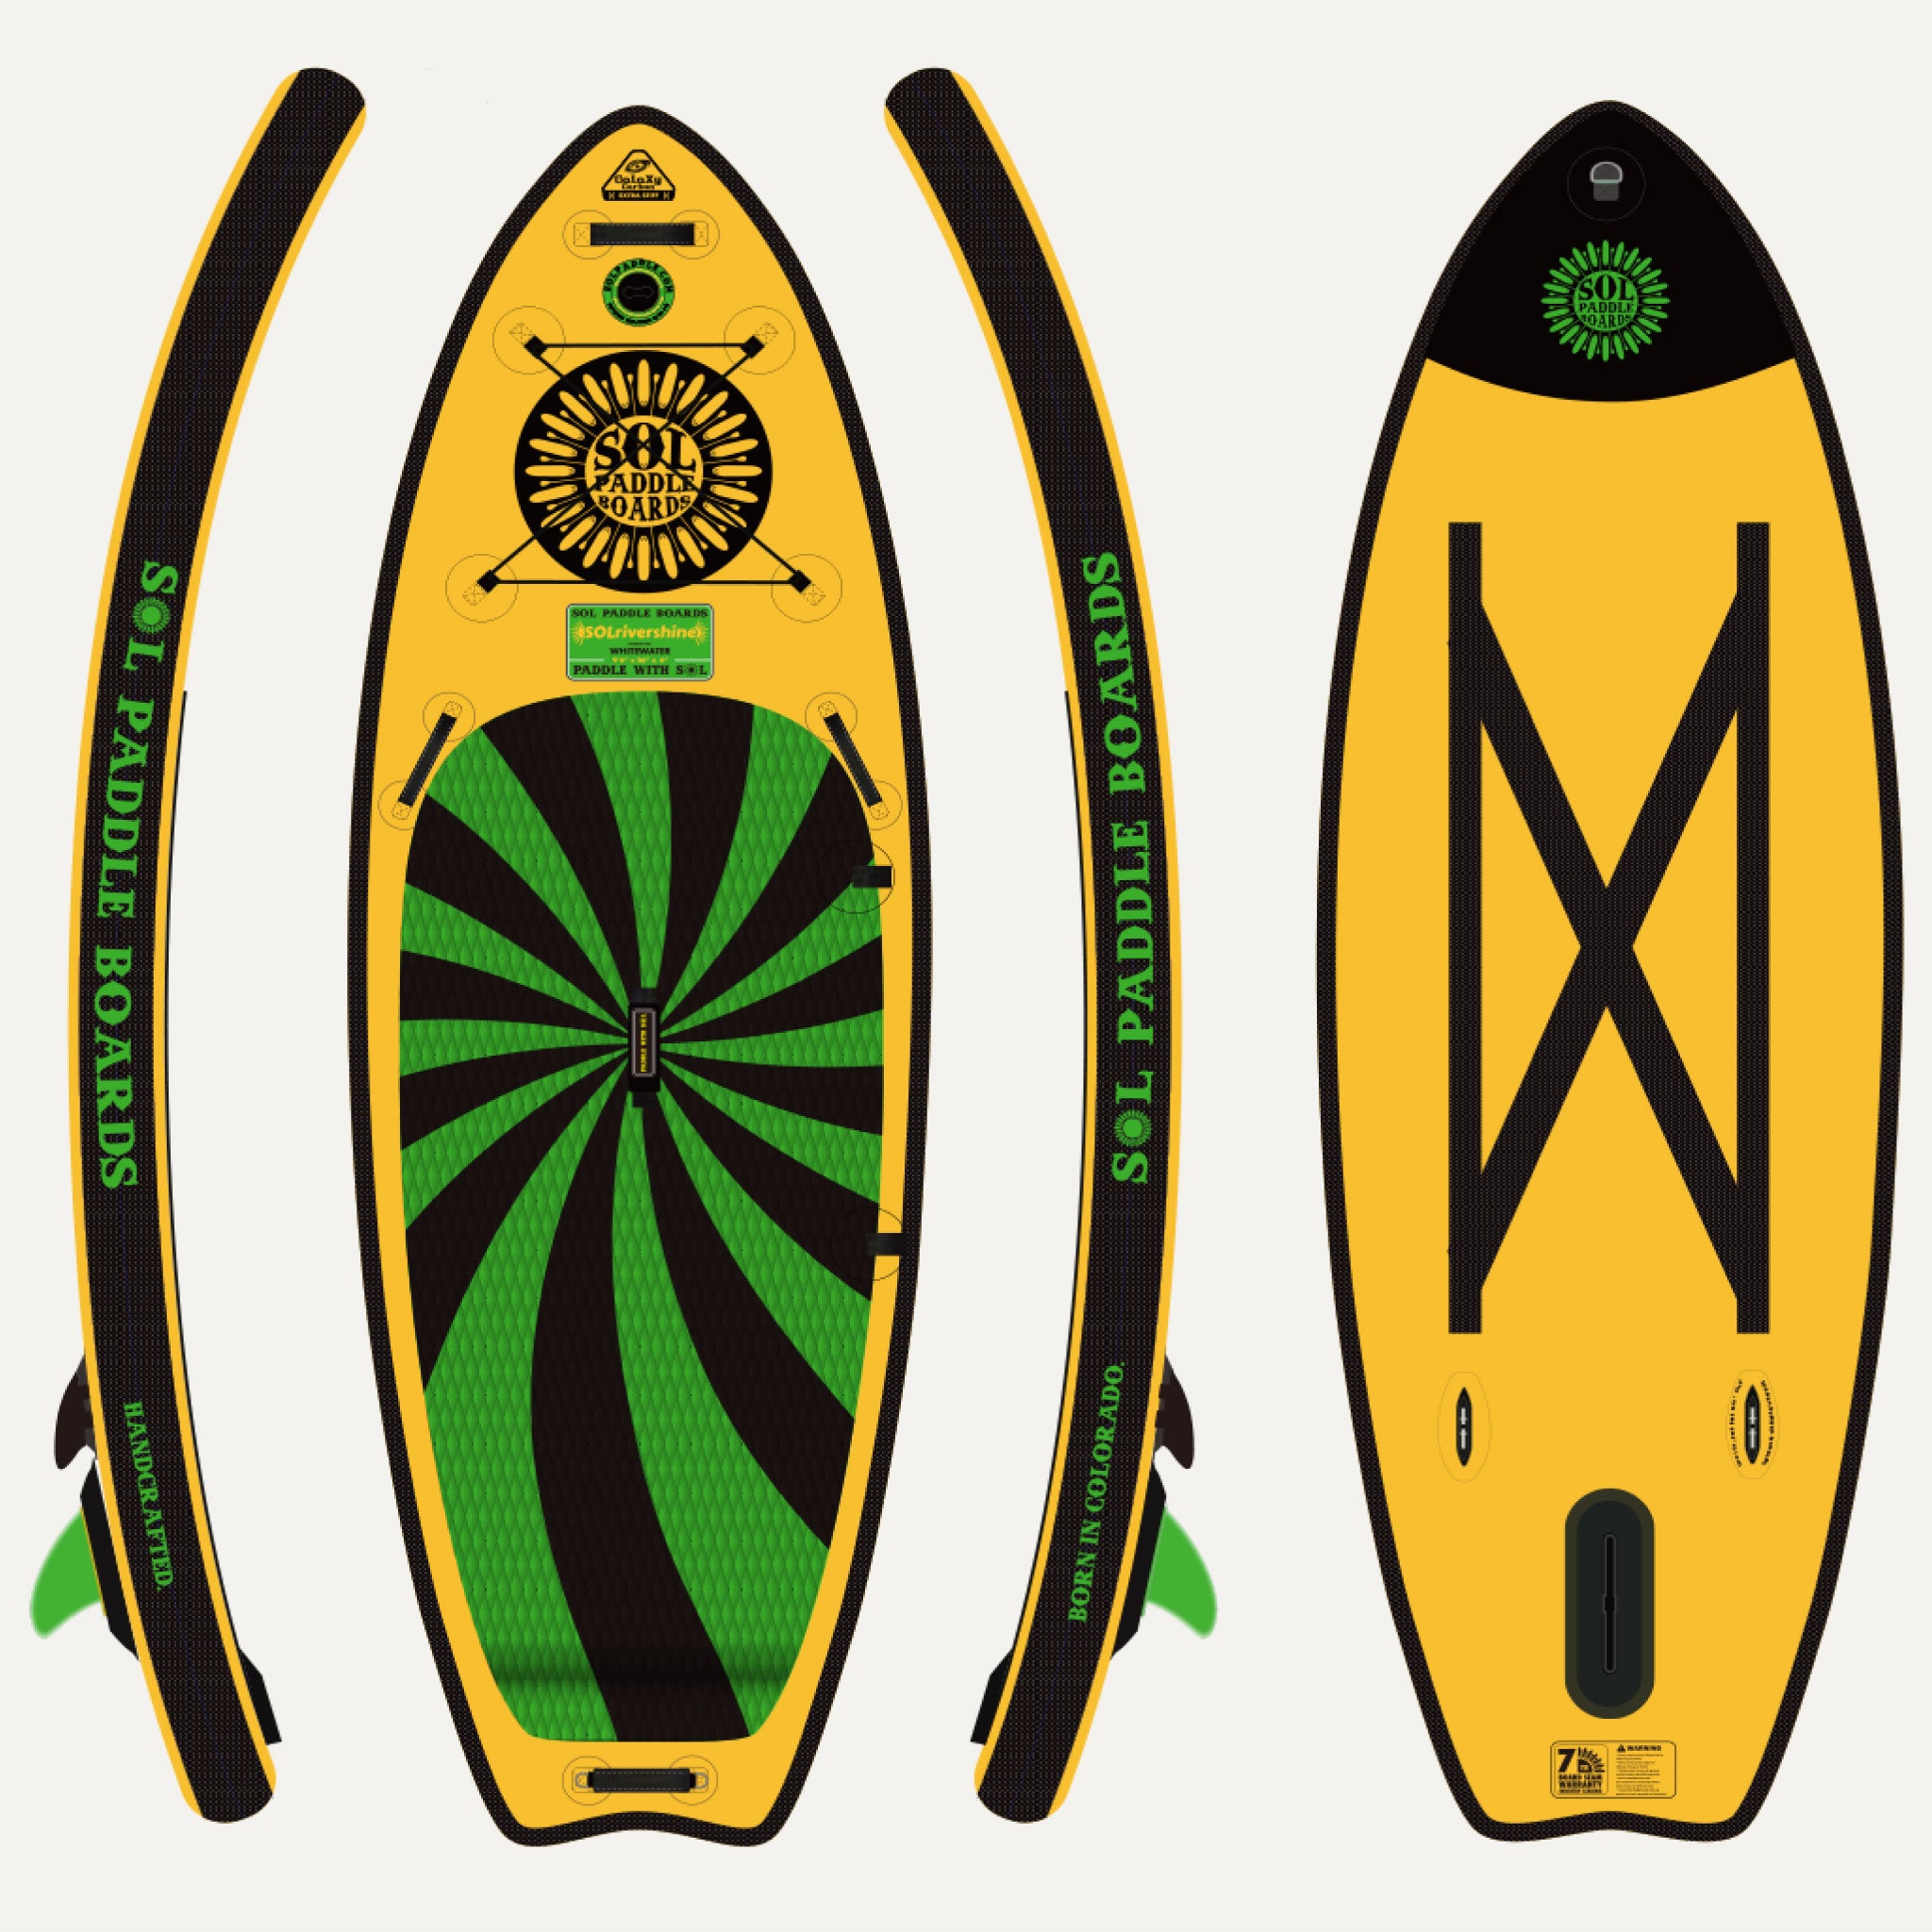 Carbon GalaXy SOLrivershine Inflatable Paddle Board showcasing all four sides of the SUP board